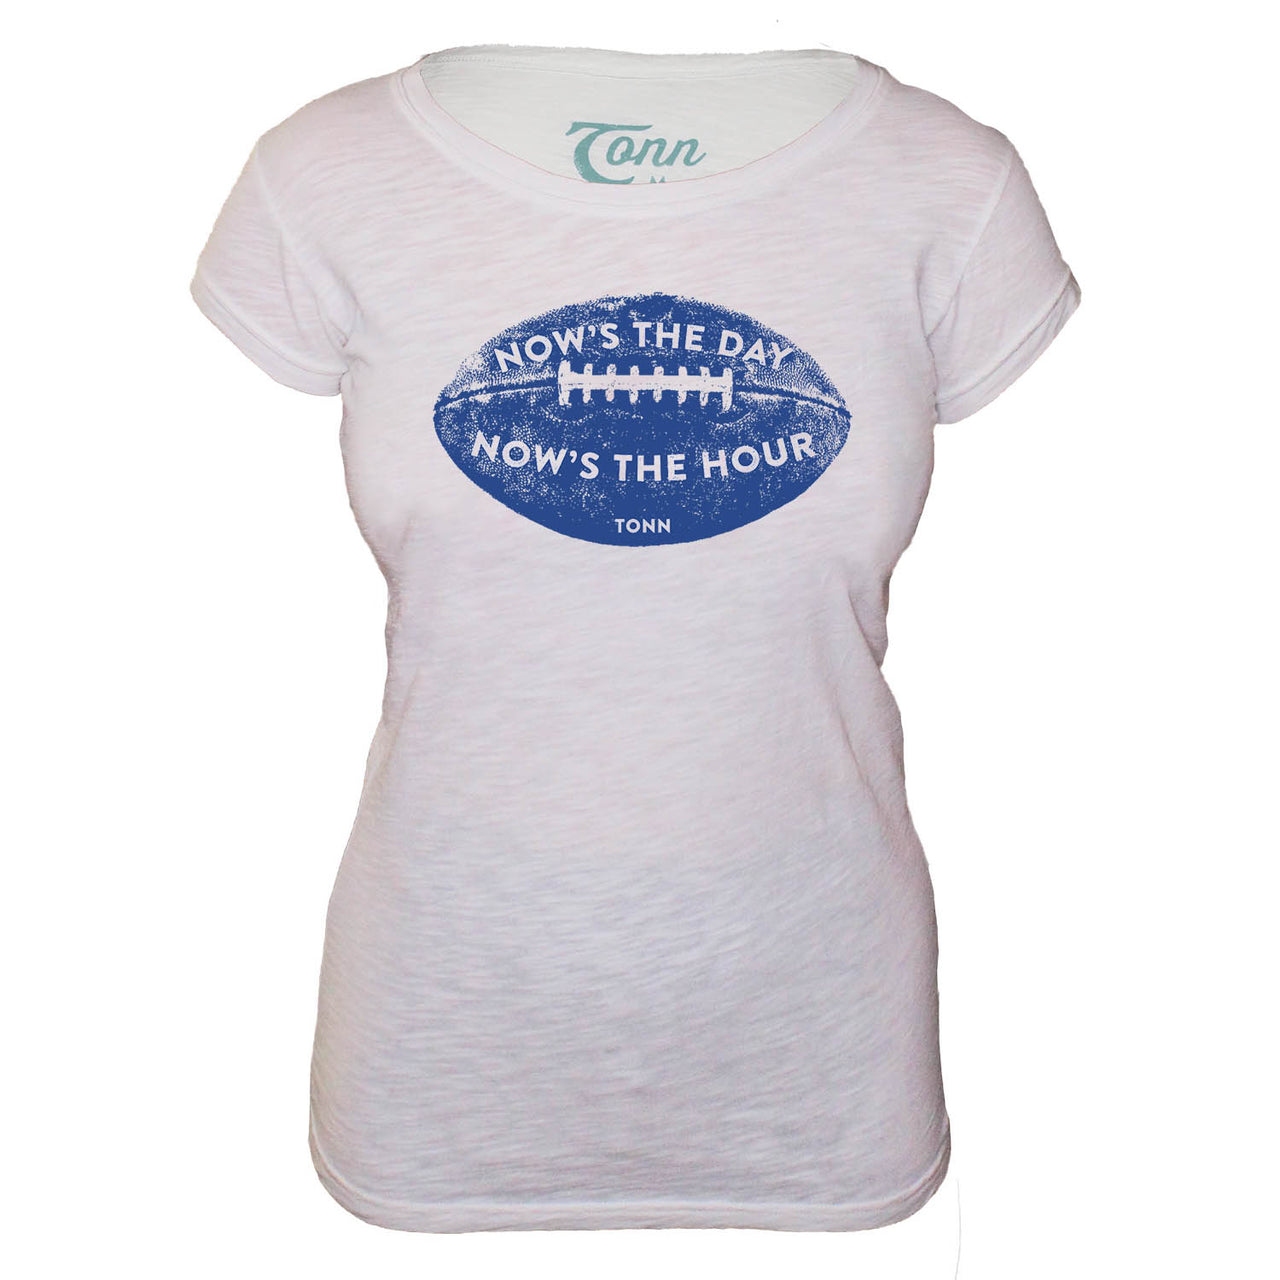 Ladies Now is the Day Rugby Tee - Petite Fit - White